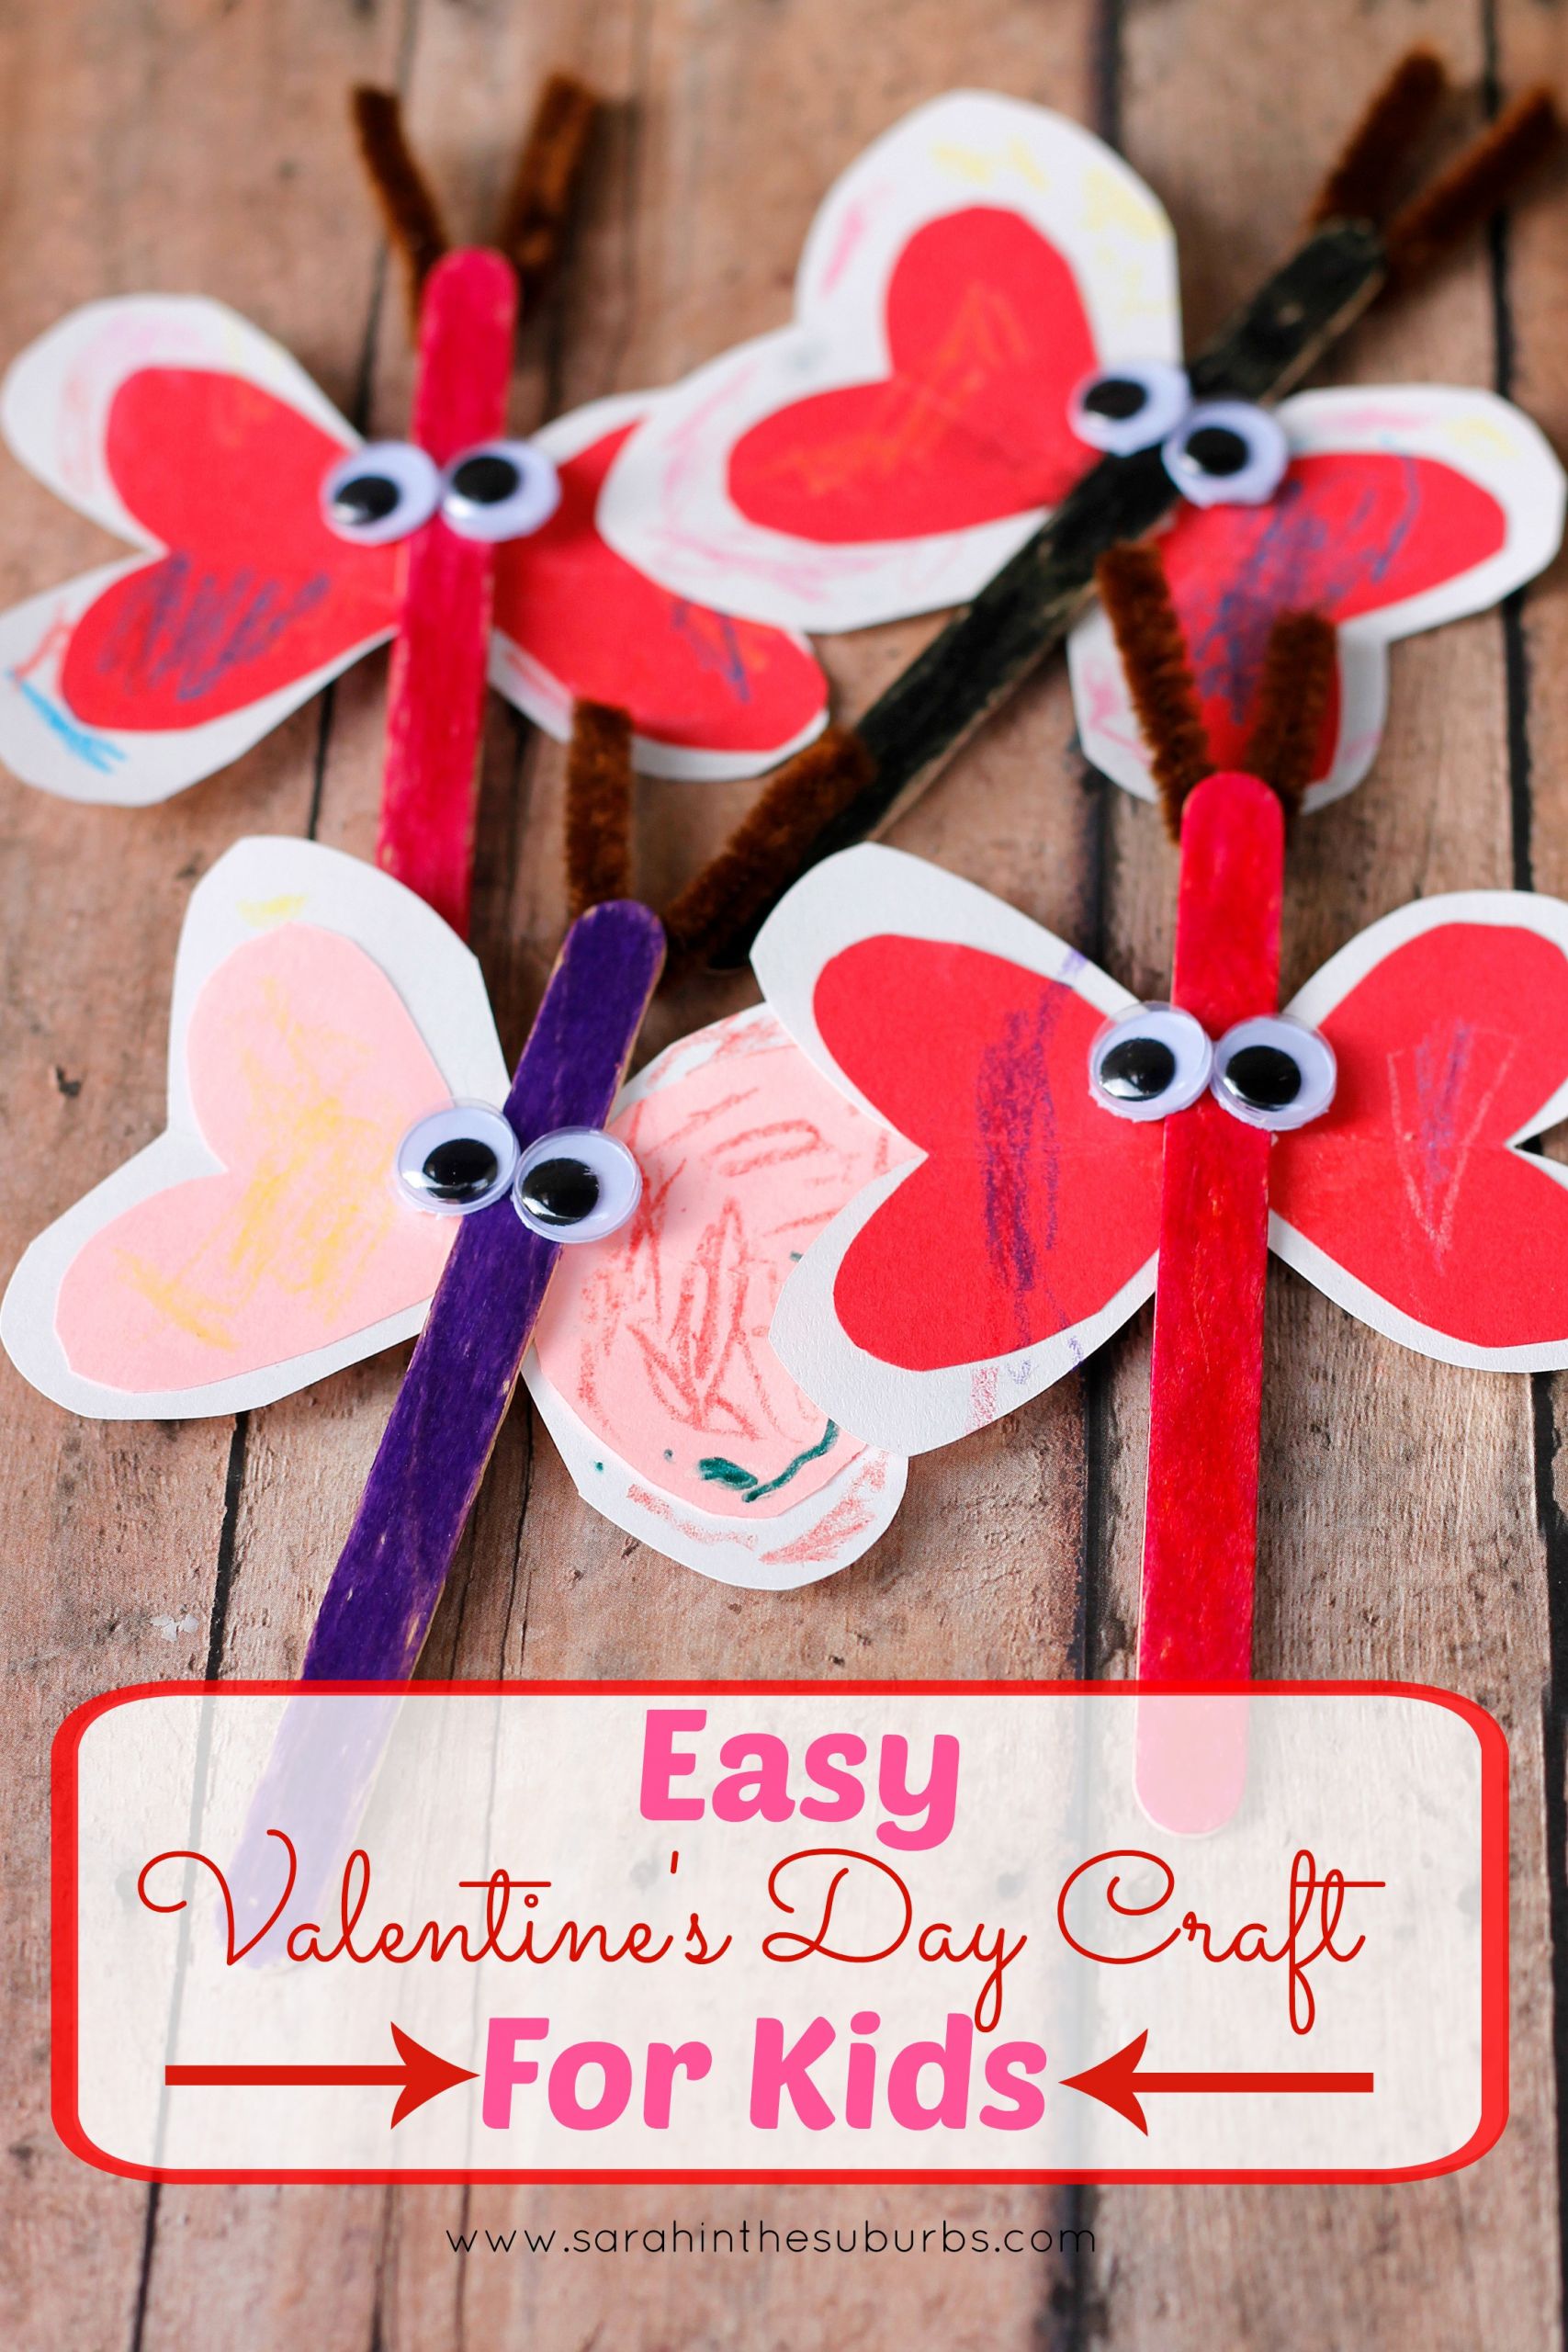 Toddler Valentine Craft Ideas
 Love Bug Valentine s Day Craft for Kids Sarah in the Suburbs